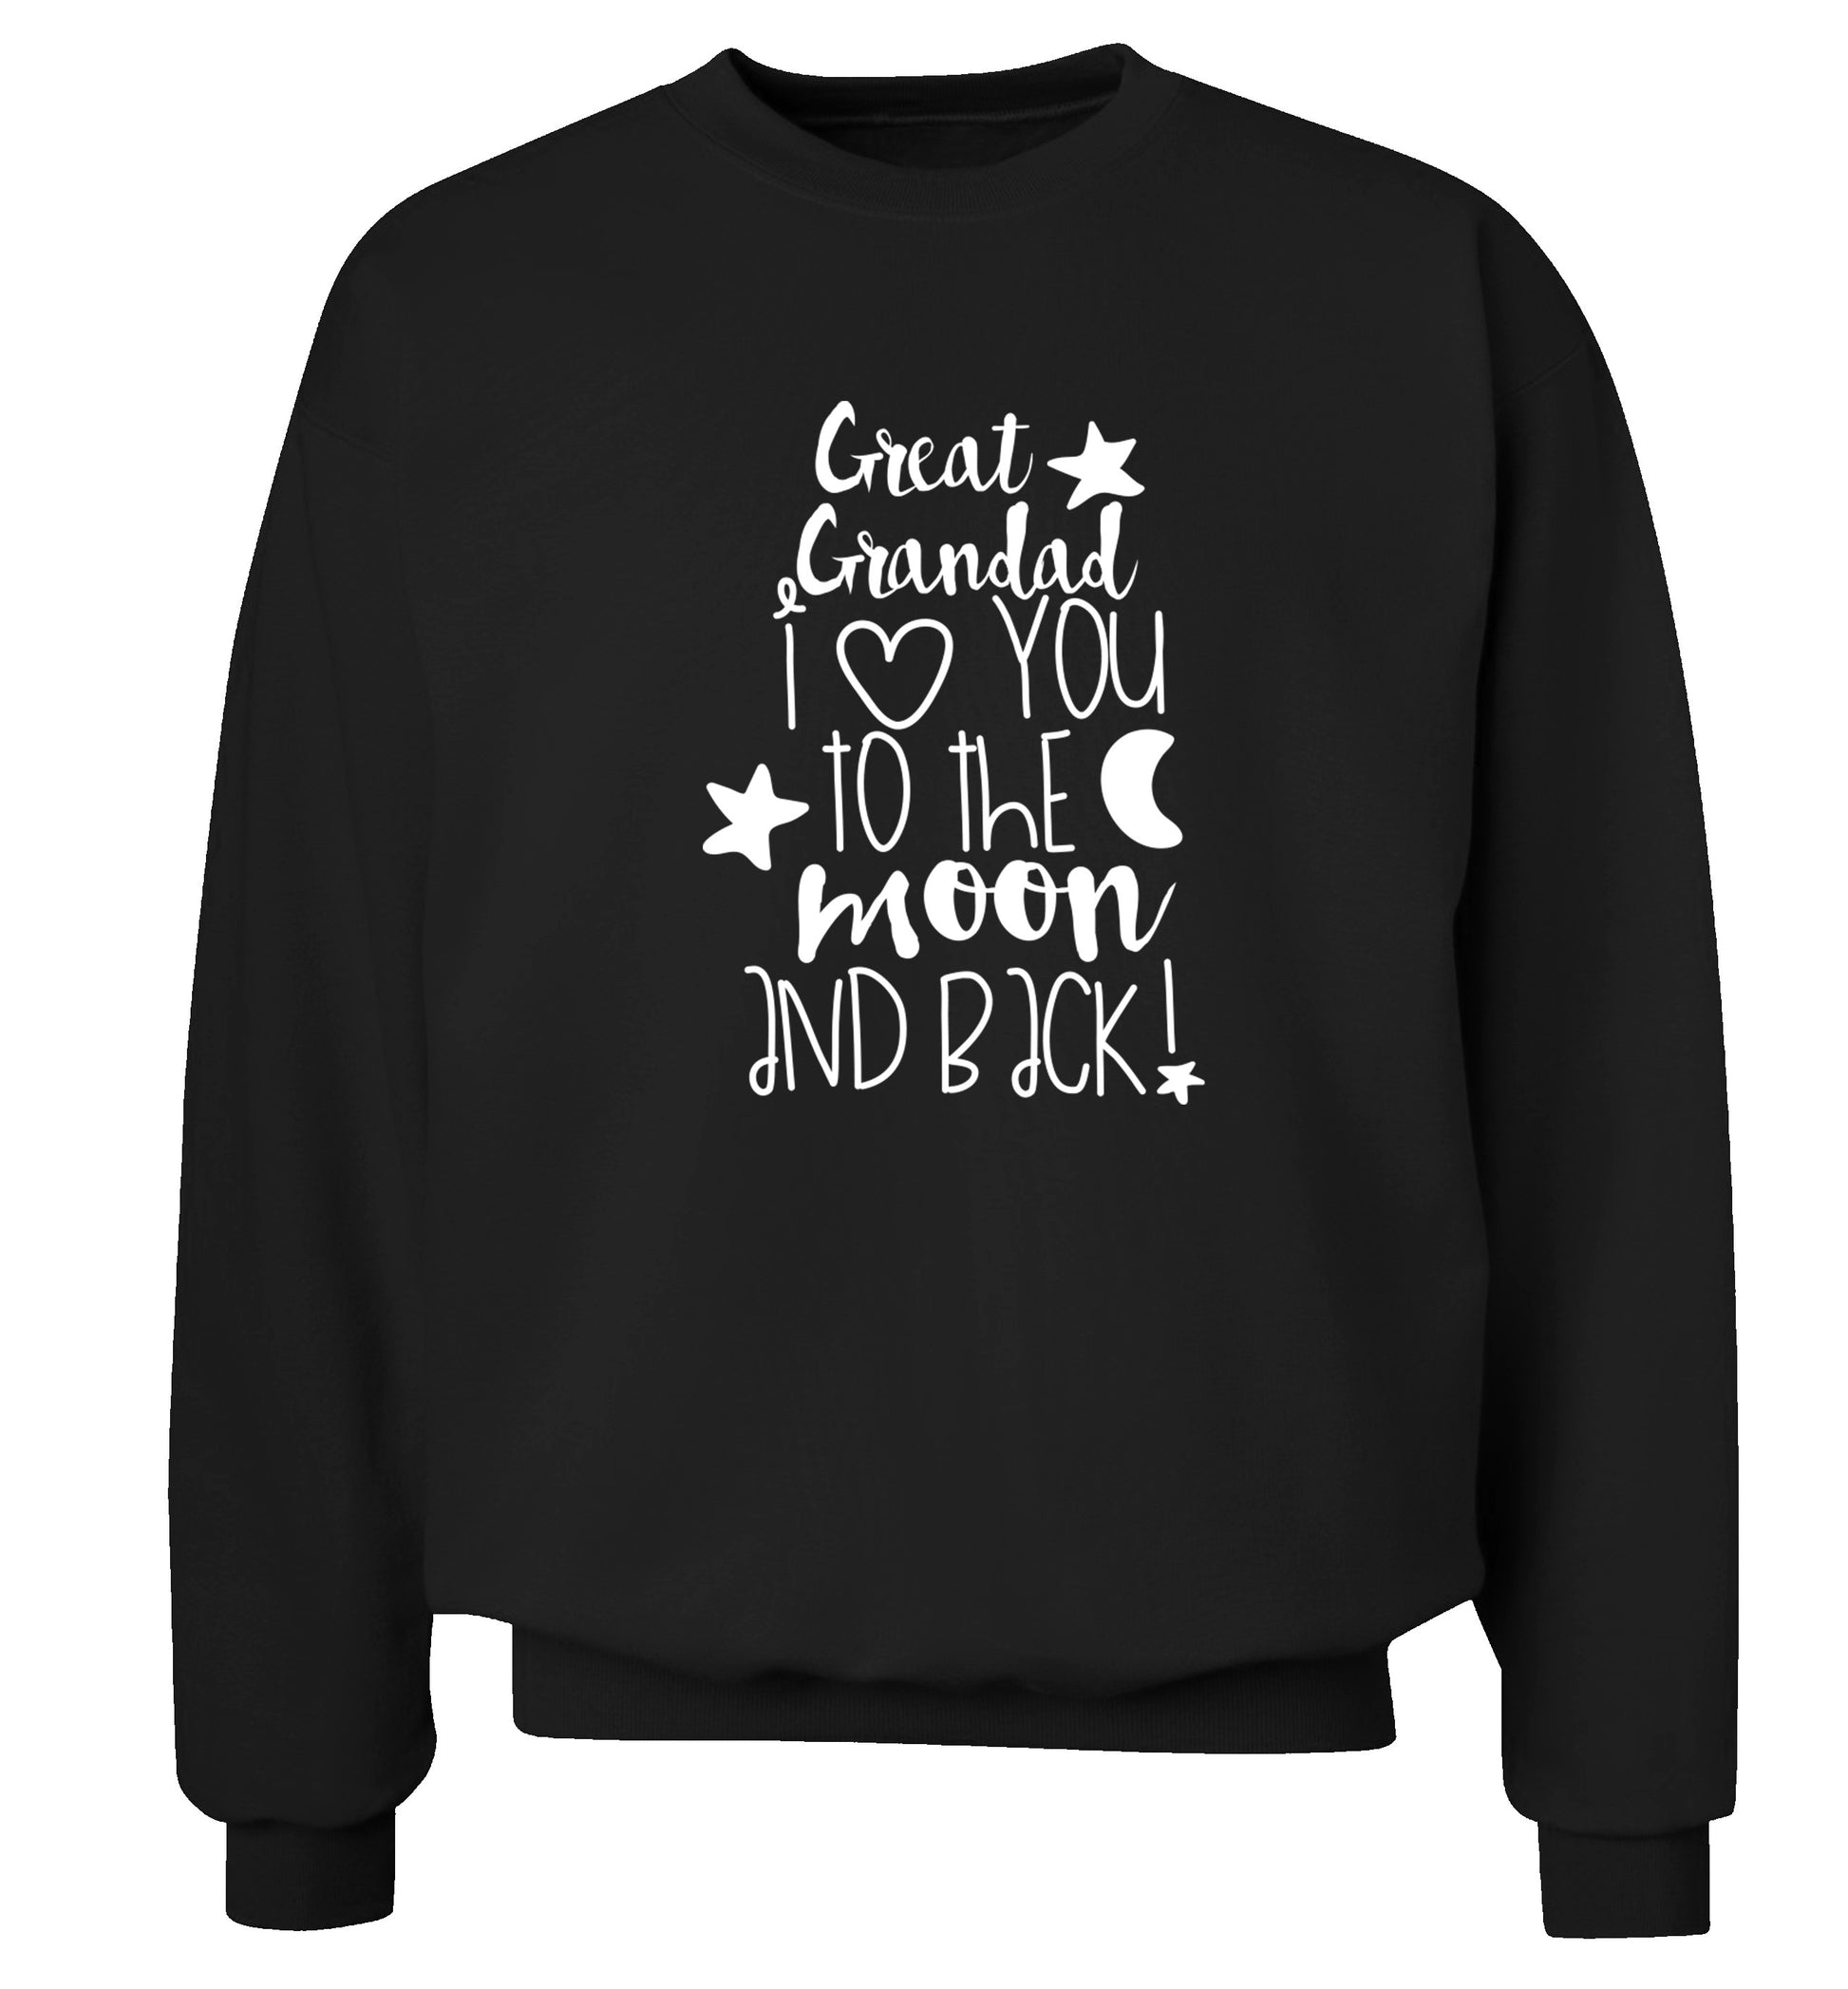 Great Grandad I love you to the moon and back Adult's unisex black  sweater 2XL